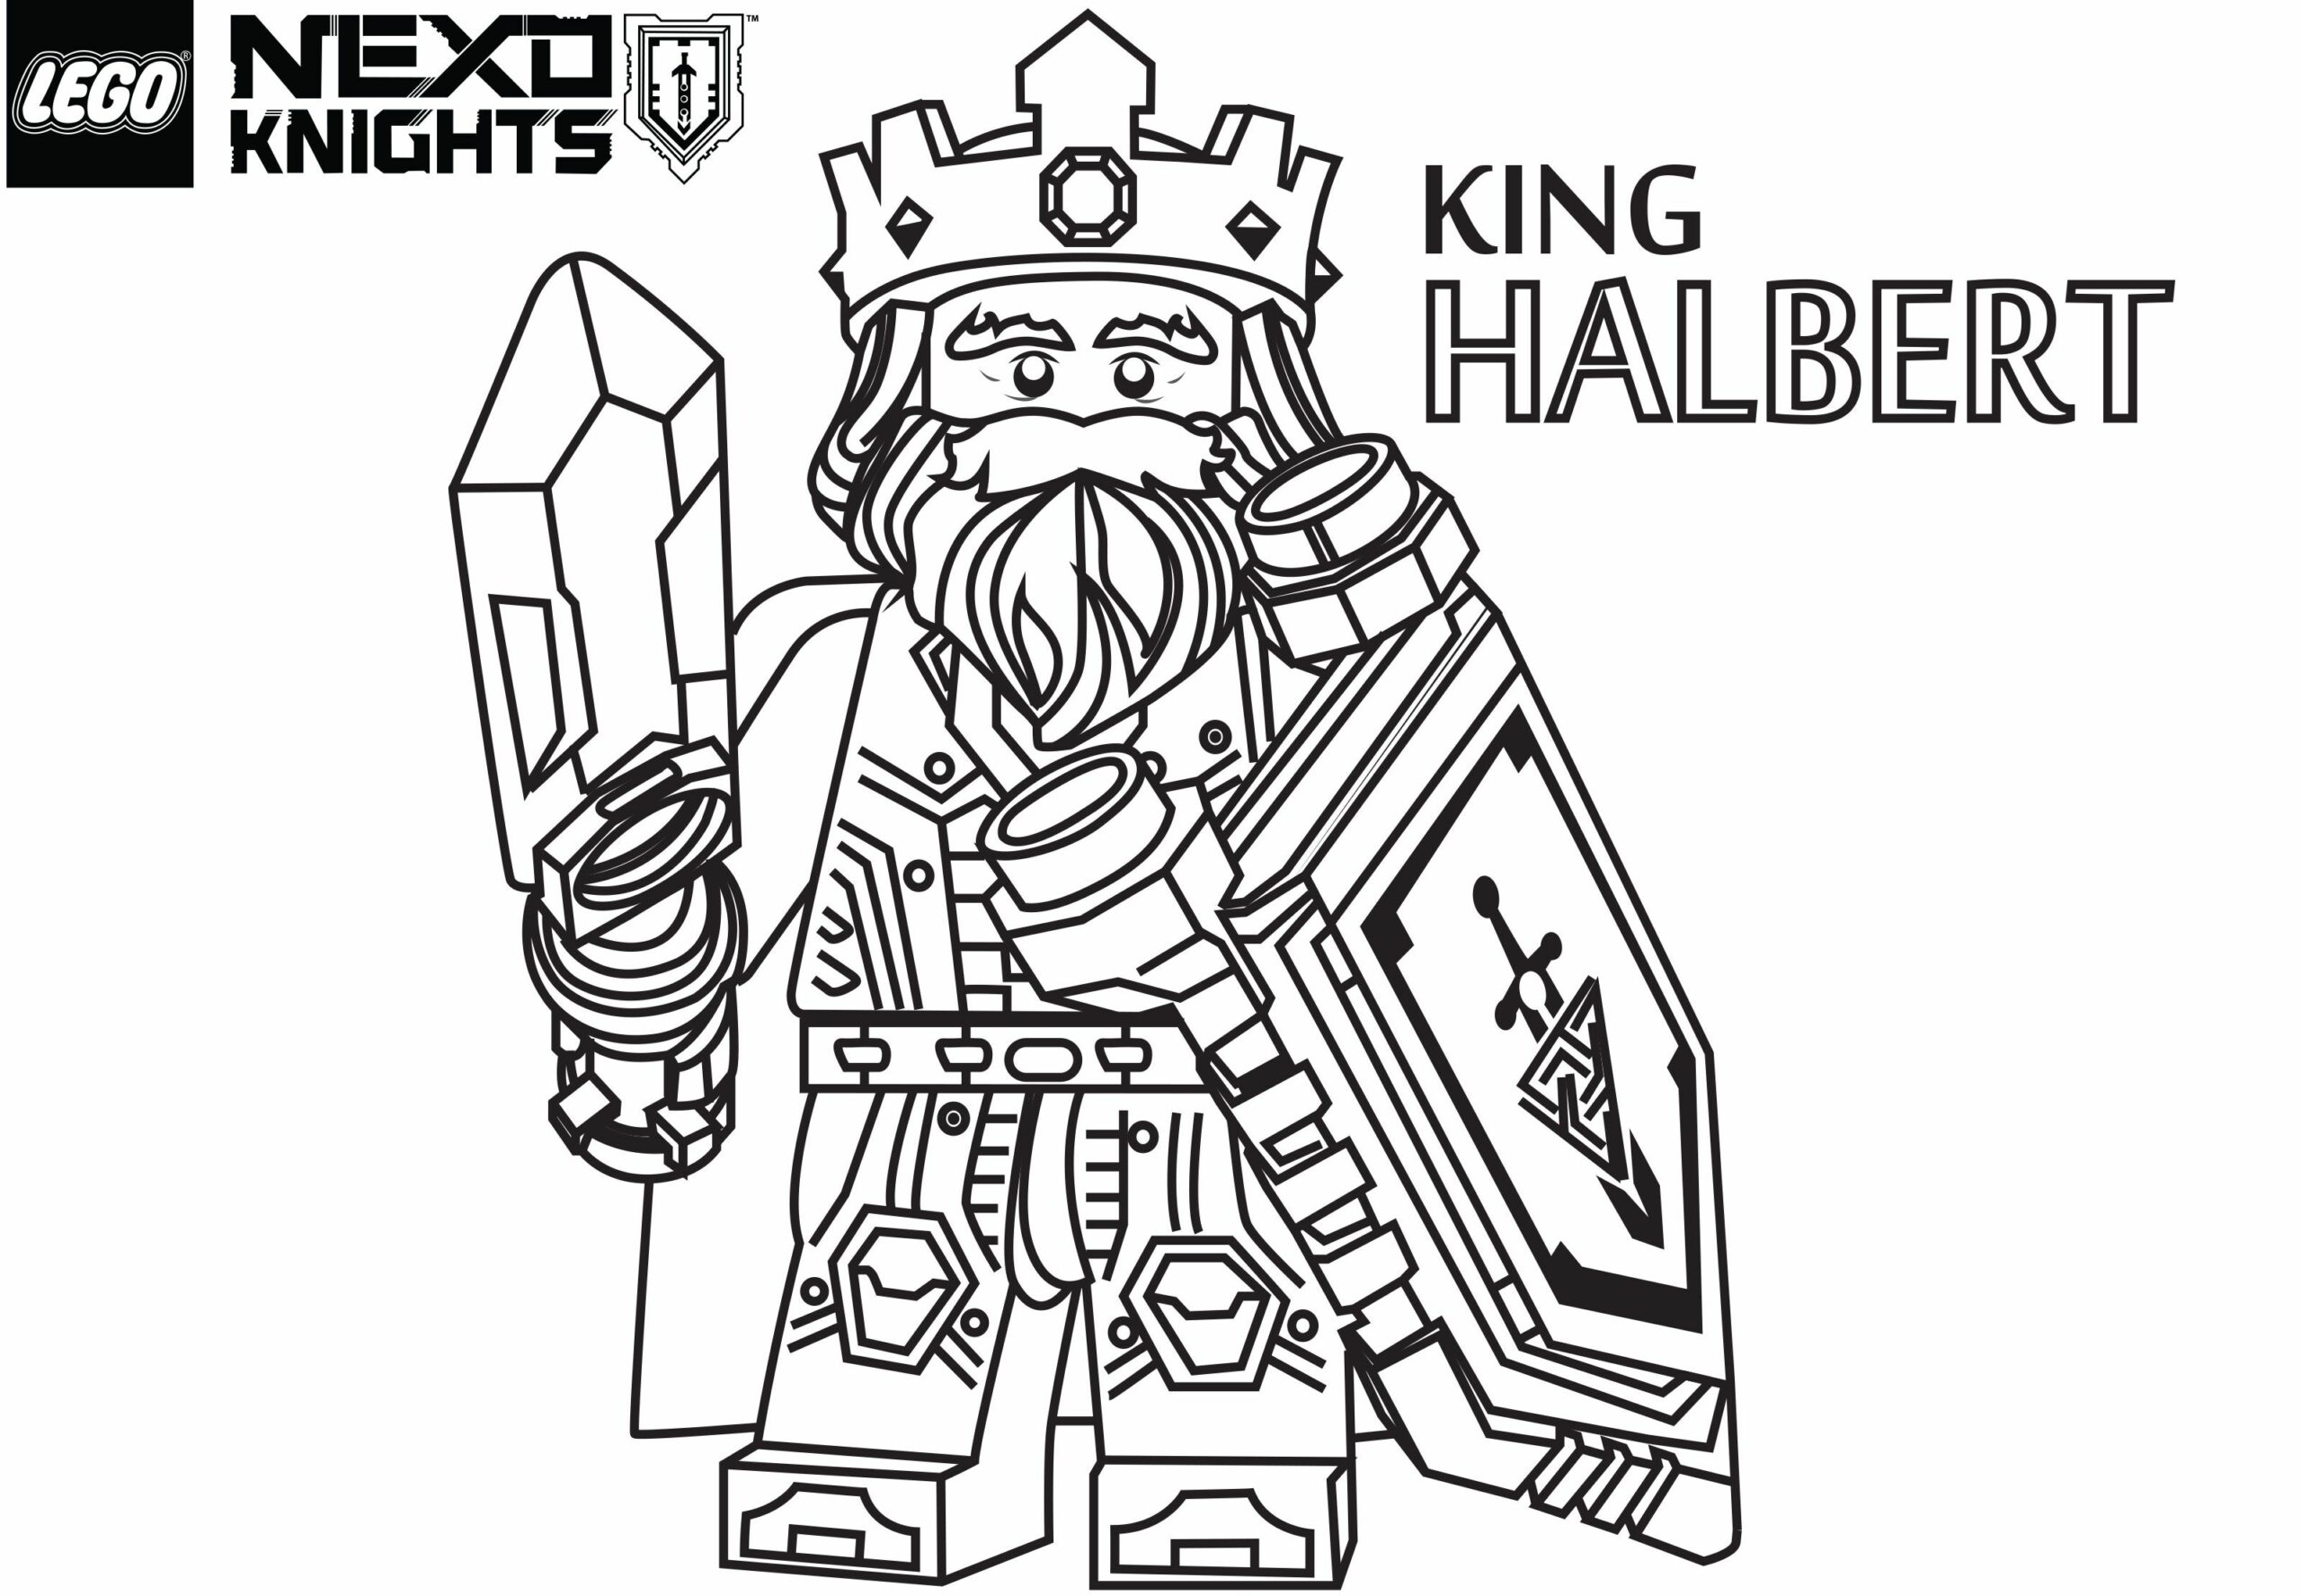 nexo knights coloring pages fortex